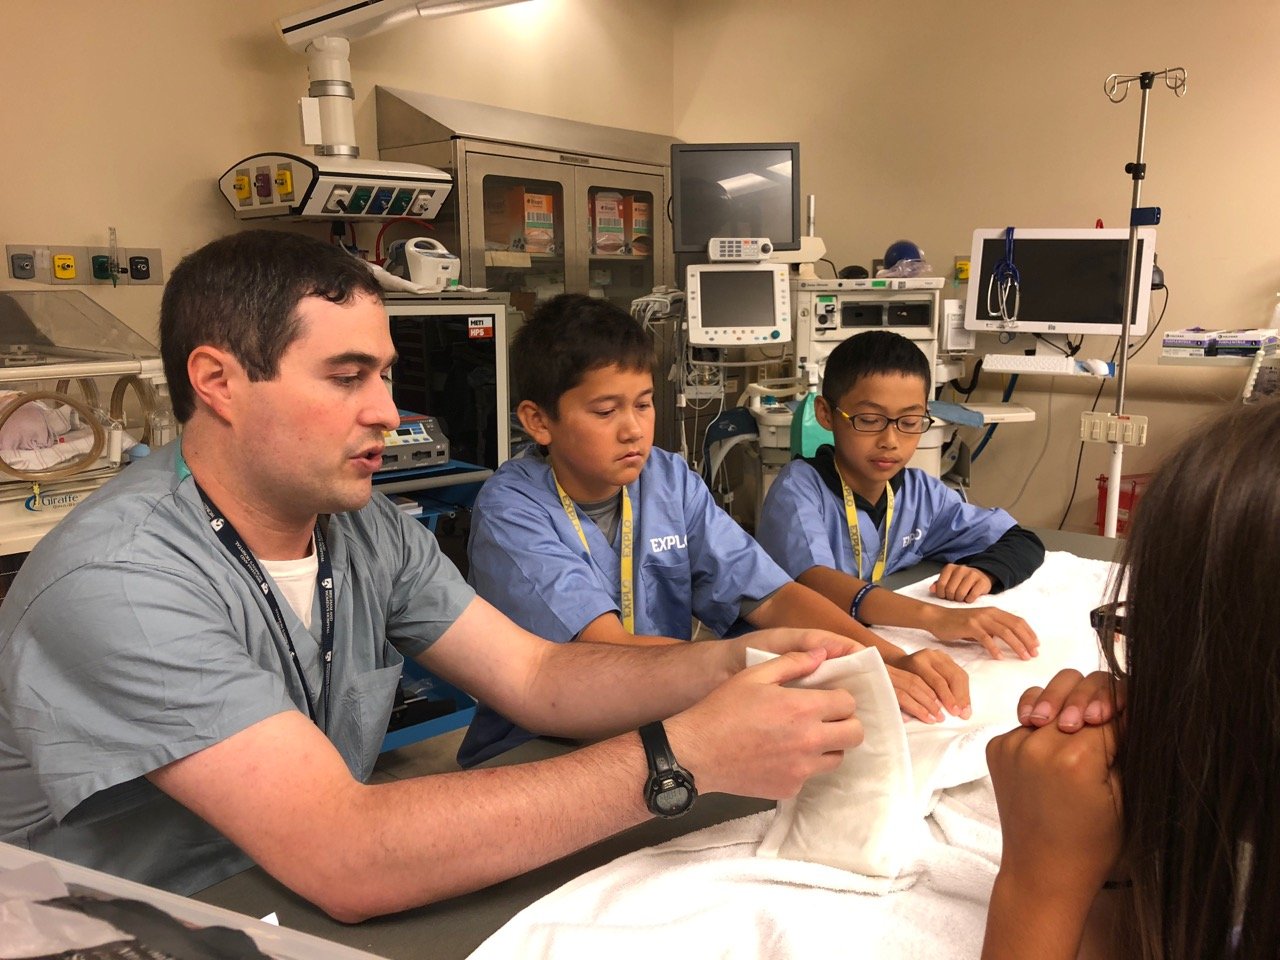 Dr. Eyre explains medical simulation to two male EXLPO students